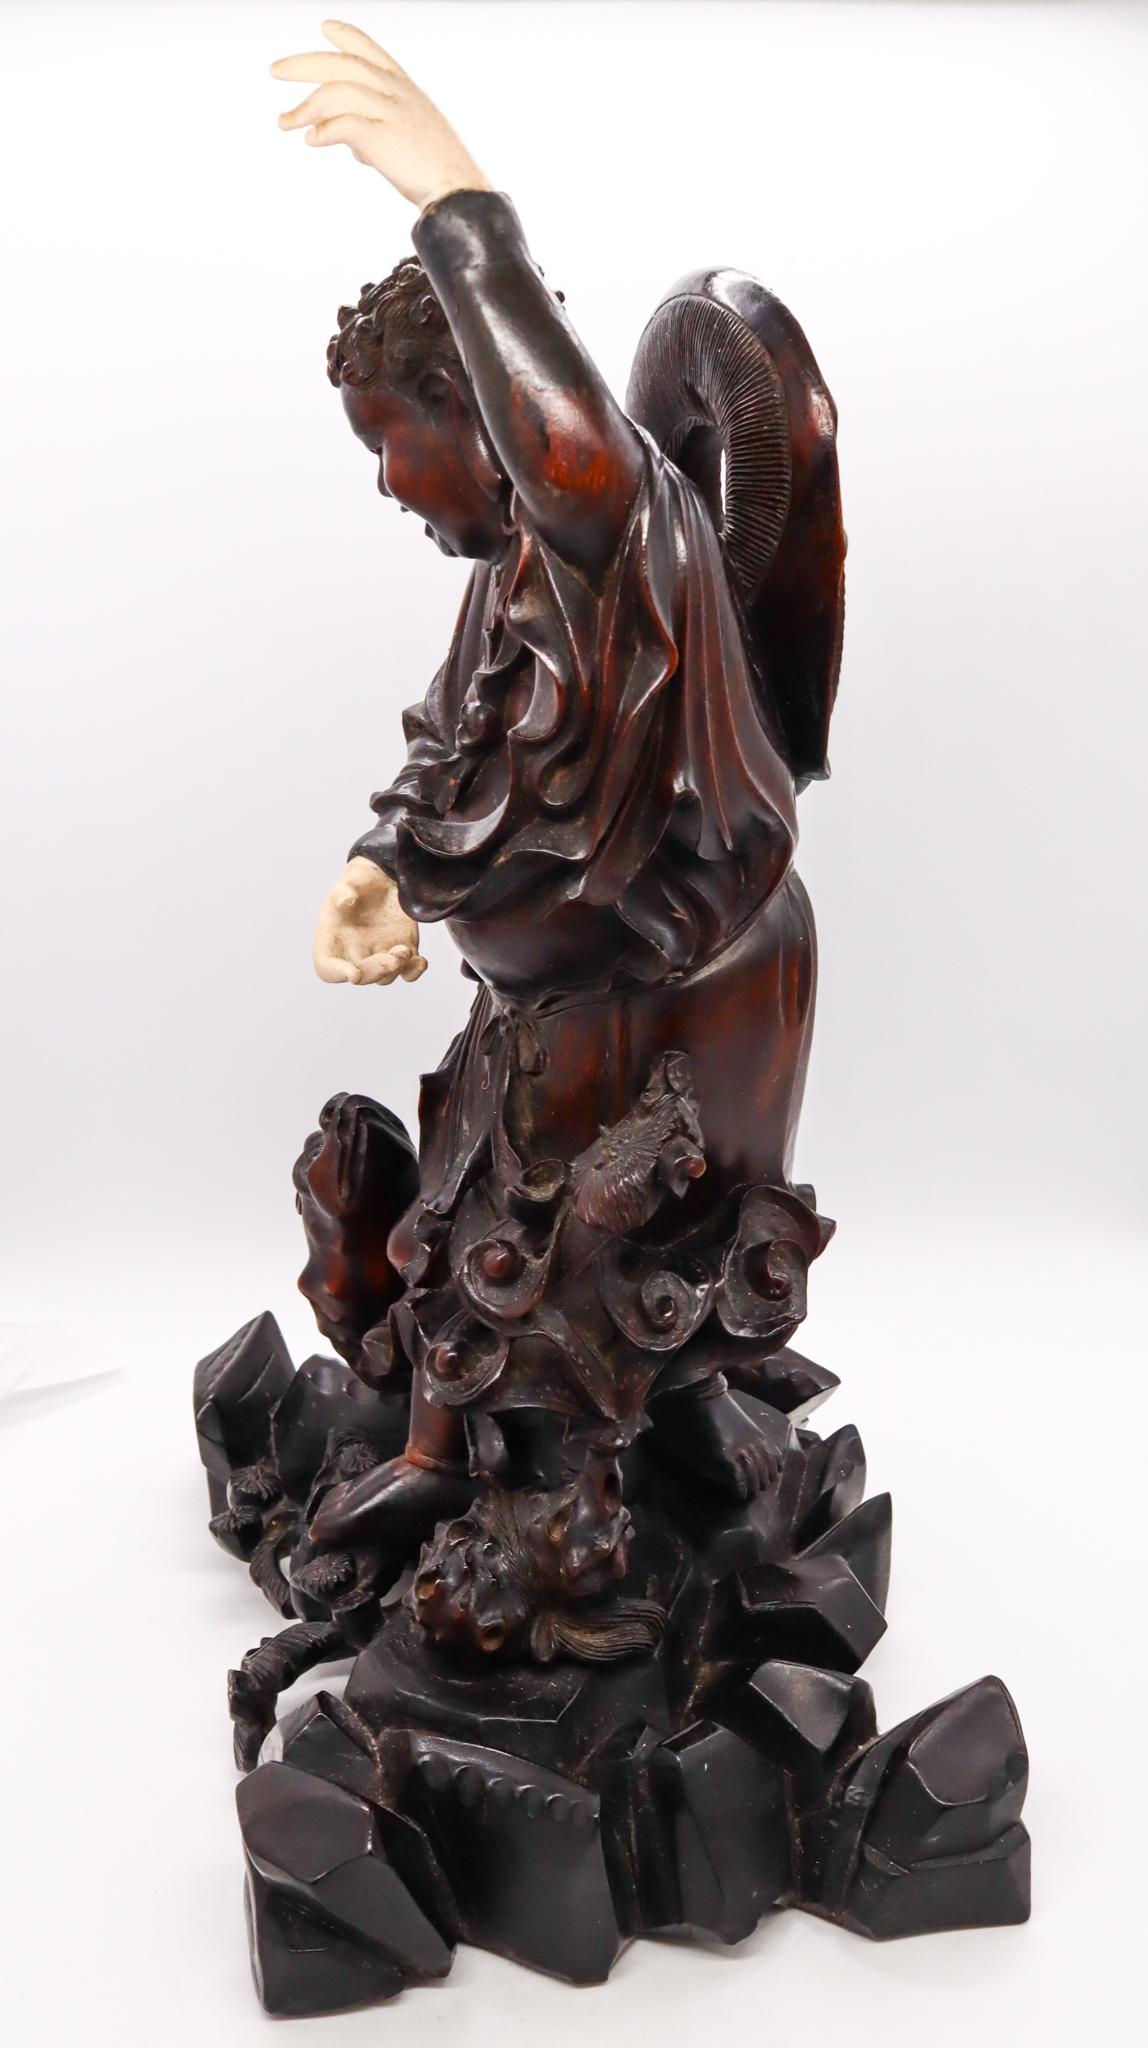 Late 19th Century China 1880 Qing Dynasty Sculpture of Liu Haichan Carved in Precious Rose Wood